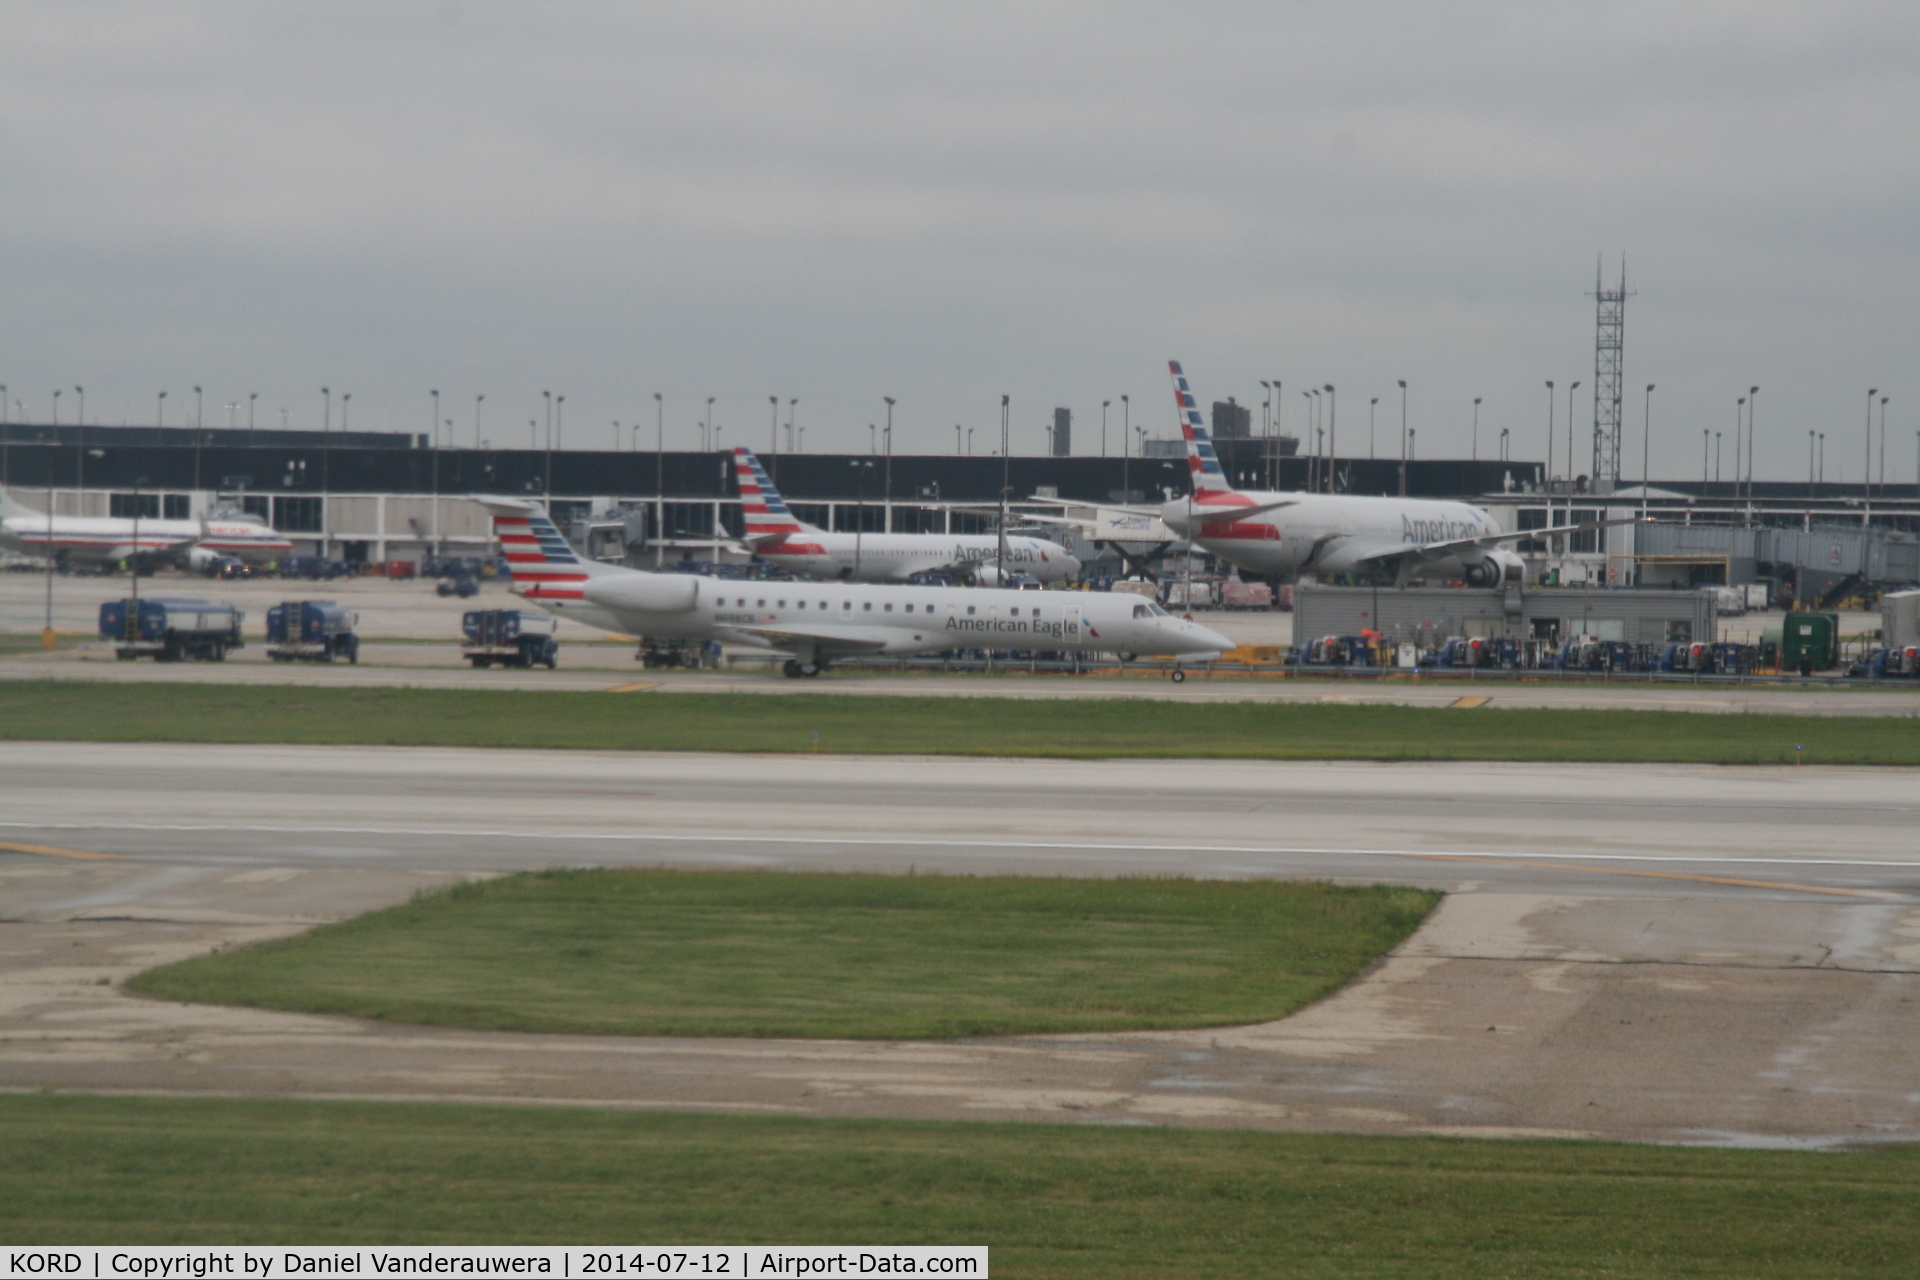 Chicago O'hare International Airport (ORD) - AA apron